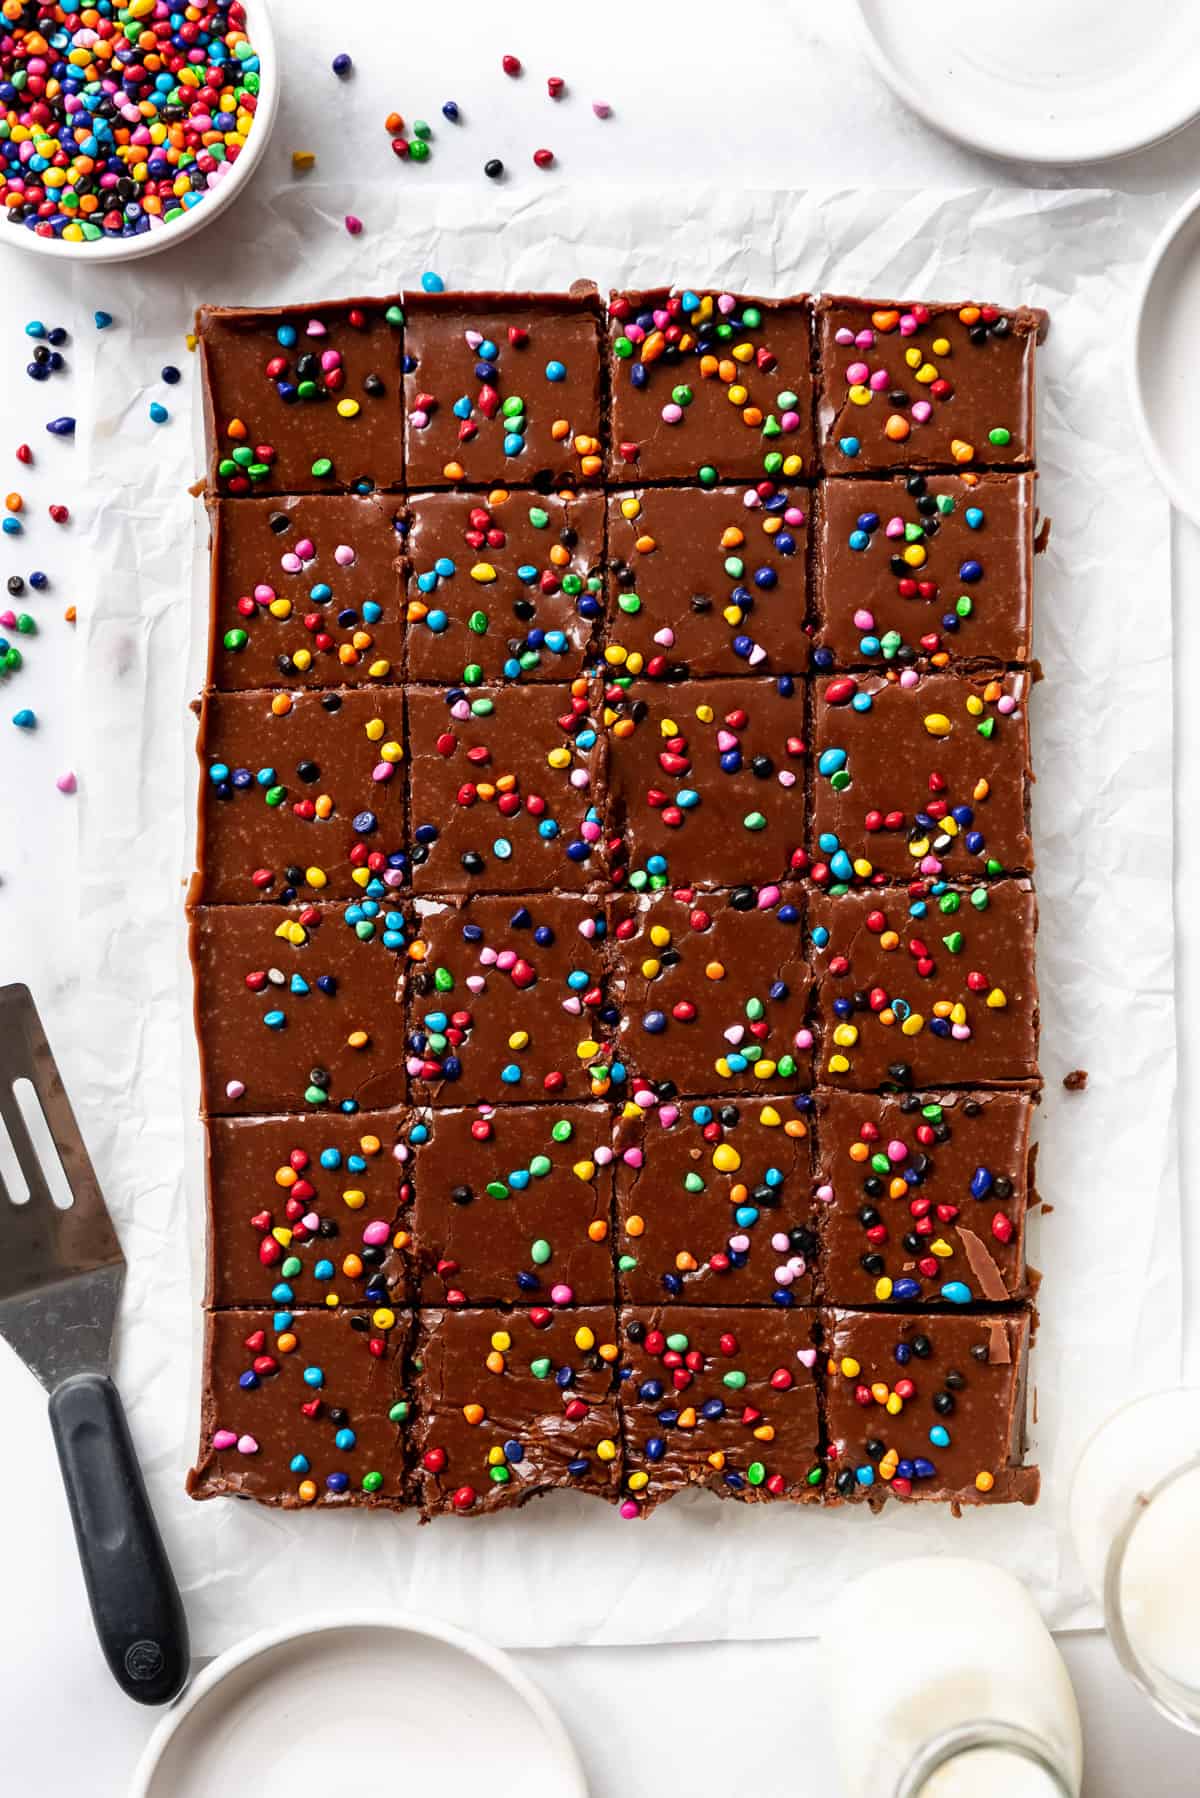 Chocolate frosted brownies cut into squares.